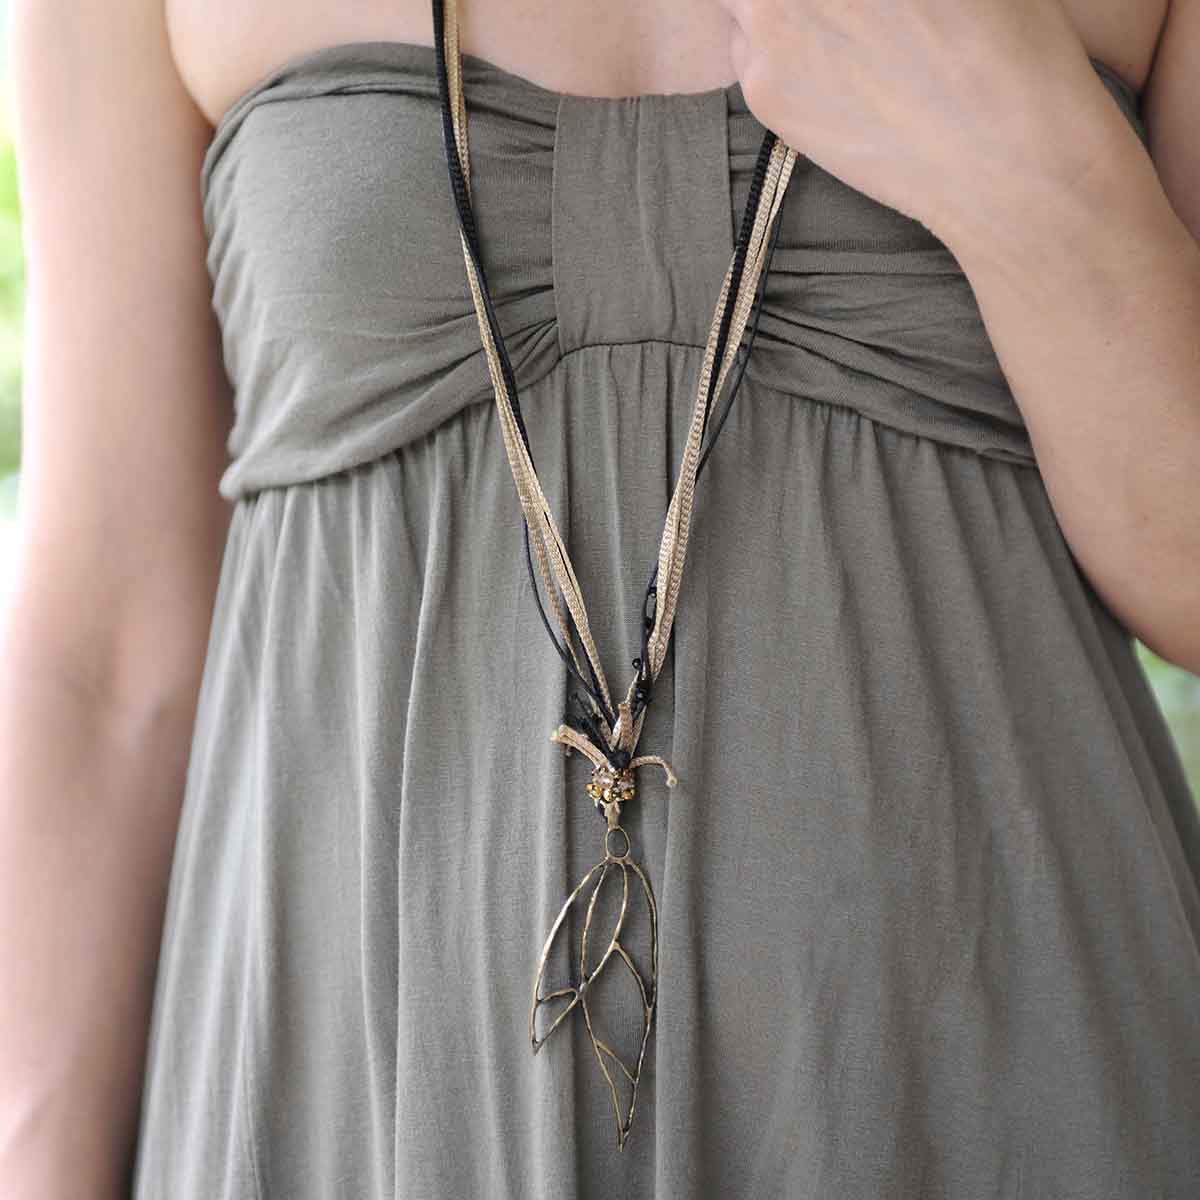 Neckklace with bronze handmade charm and silk ribbons. Designed and made for Bead A Boo jewelry by Katerina Glinou.